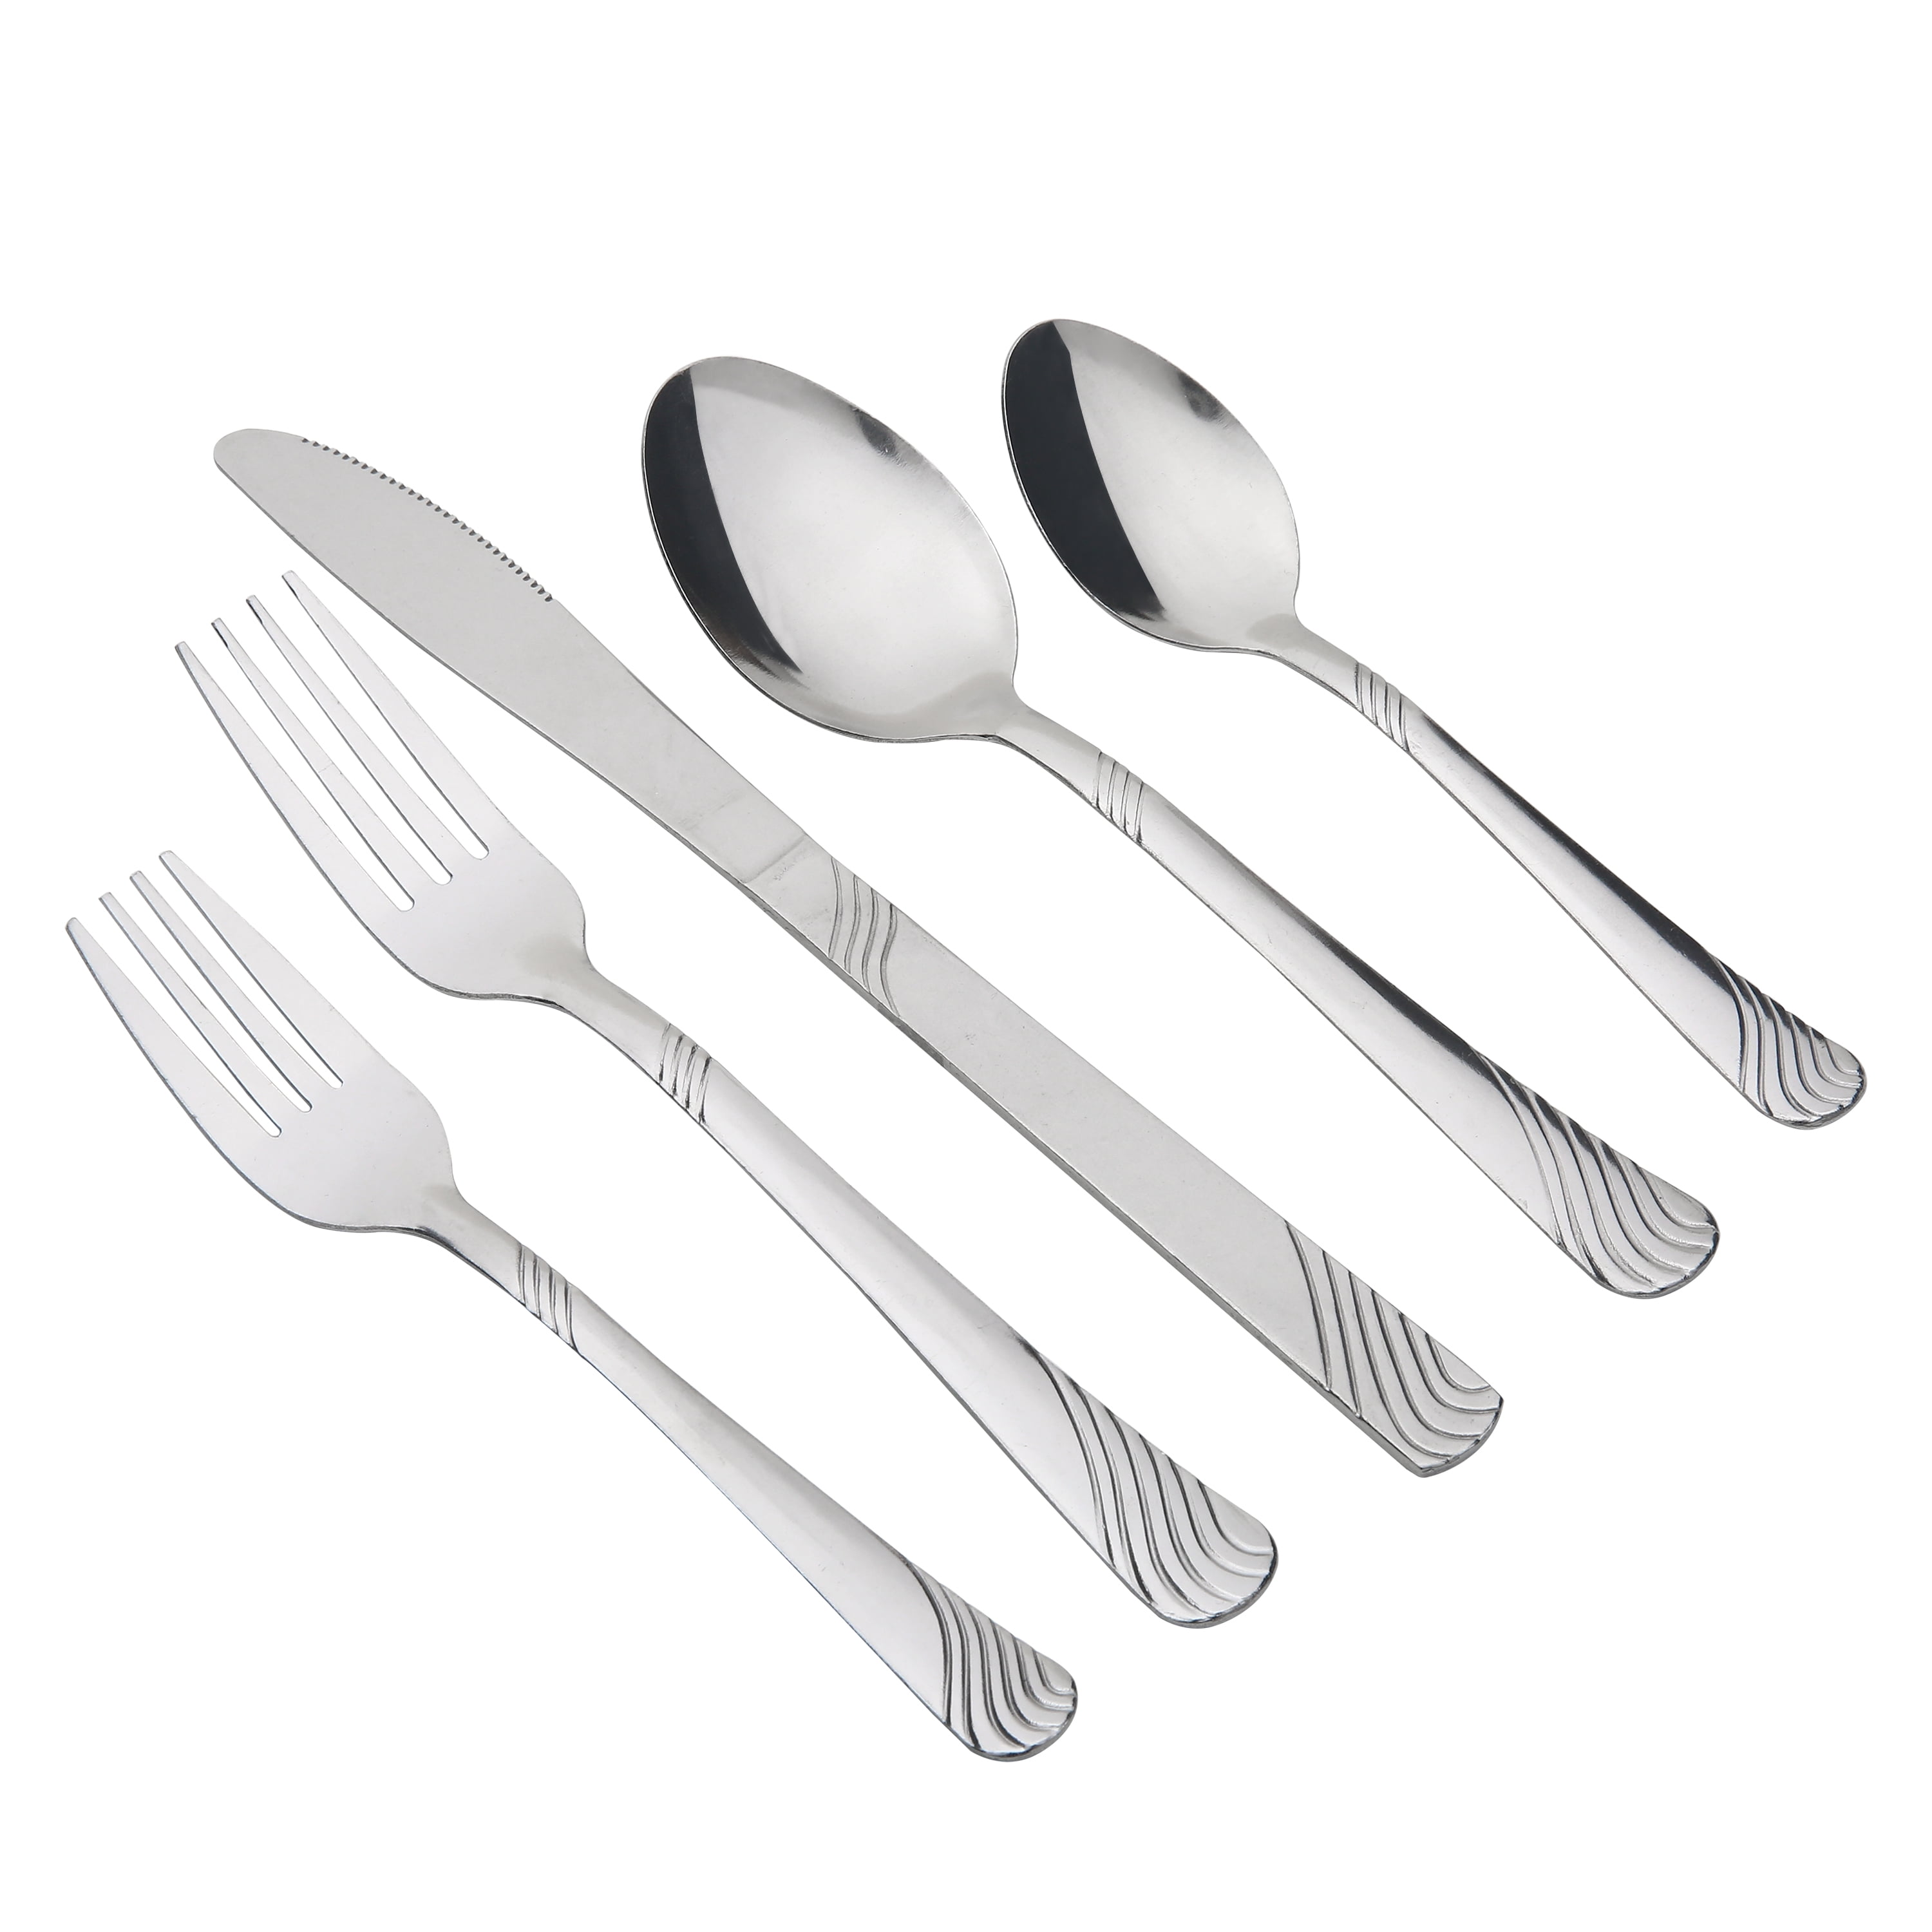 Tribal Cooking 48 Piece Silverware Set - Service for 8 - Stainless Steel  Flatware serving set - Cutlery Set - Knives, Fork, and Spoon - Utensil sets  